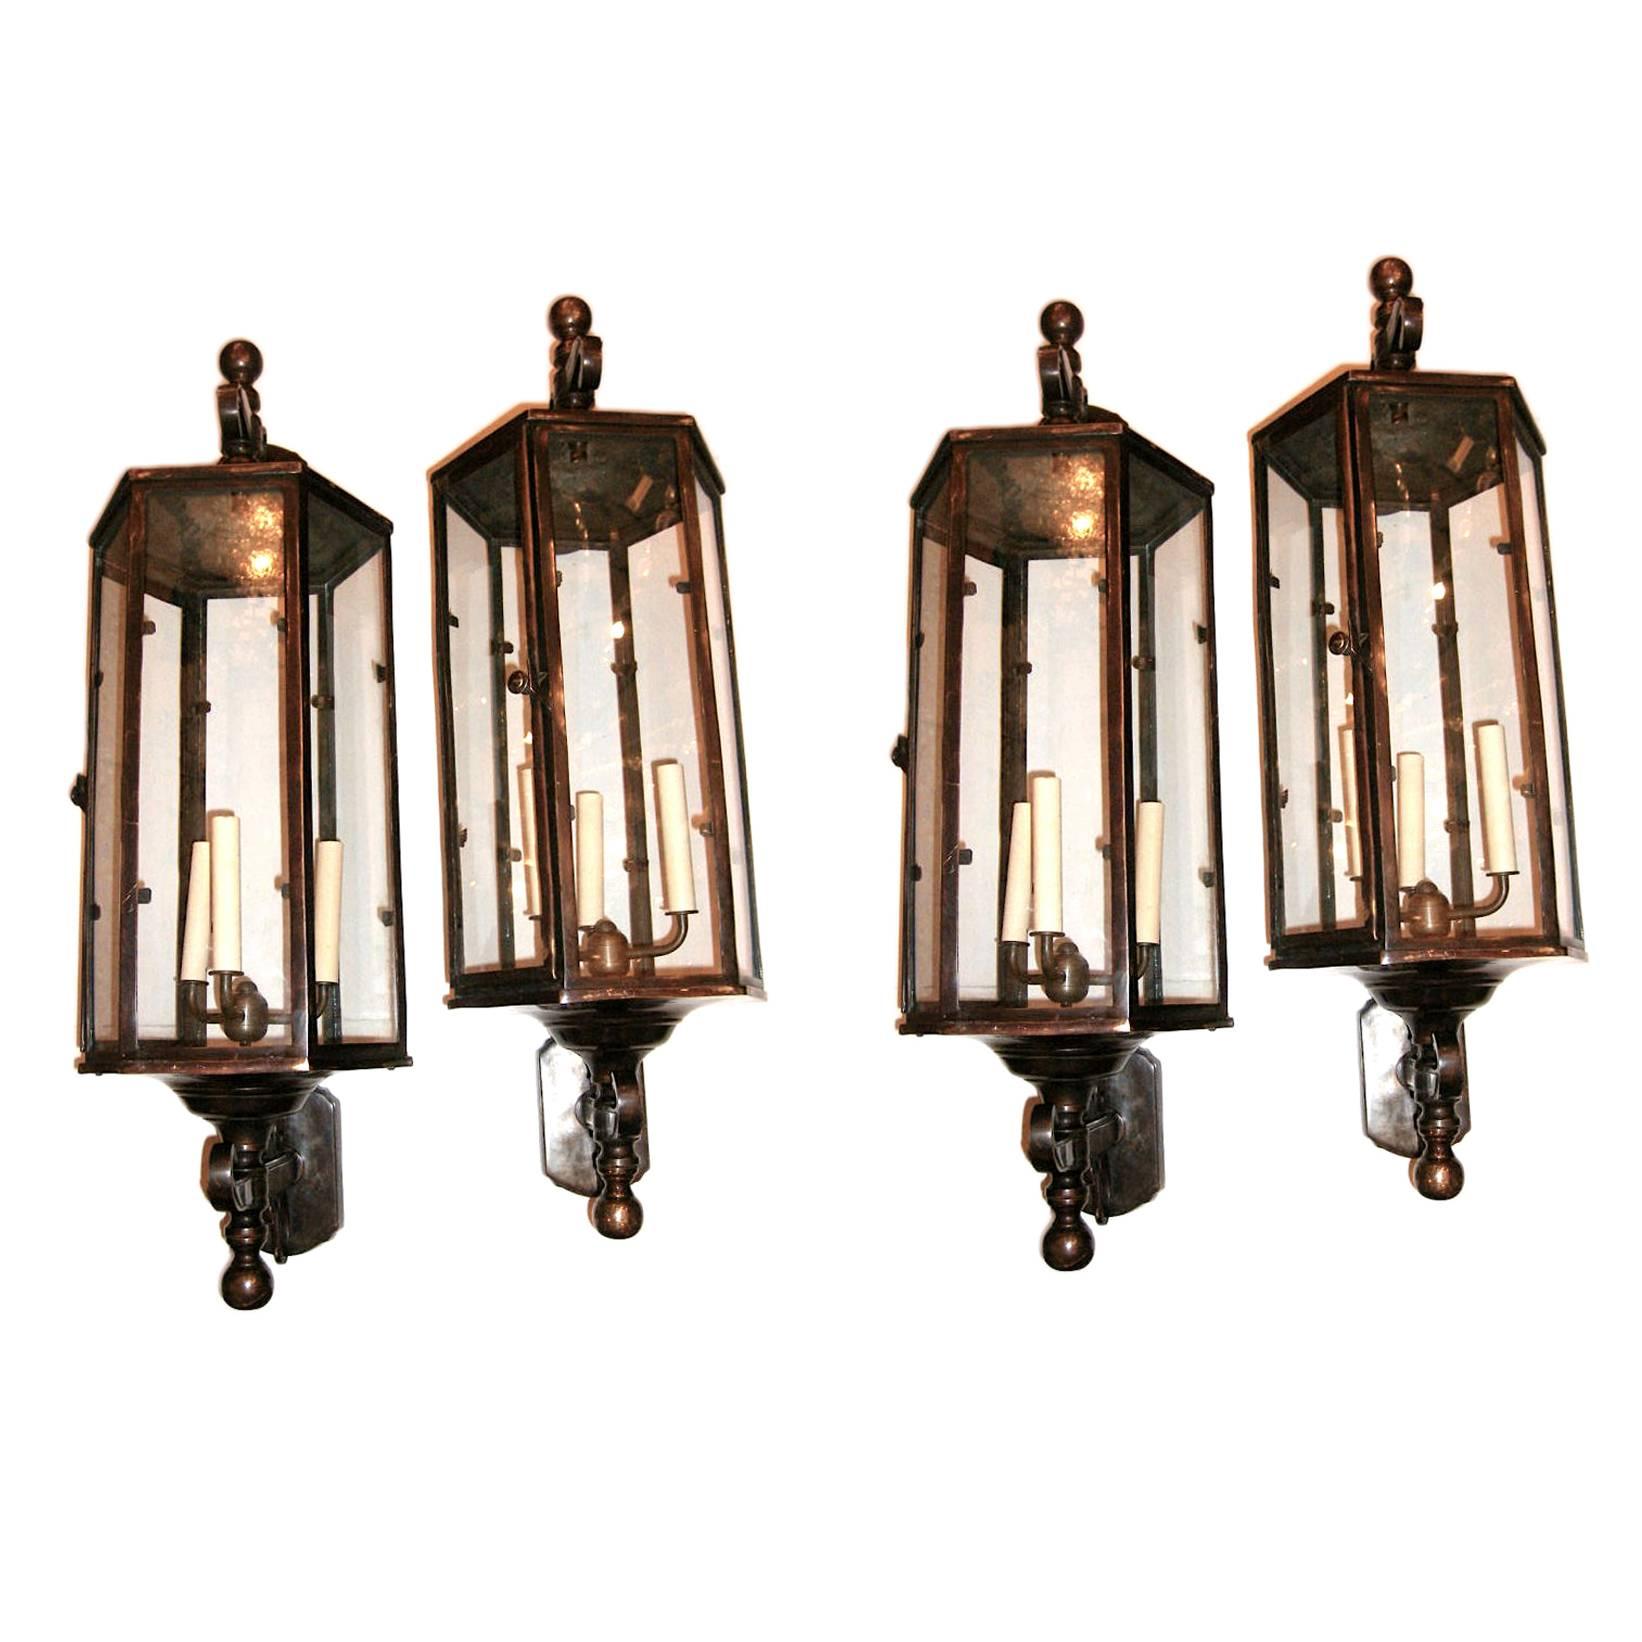 Pair of four large English circa 1920s patinated bronze wall-mounted indoor or outdoor wall lanterns with four interior lights and clear glass panels. Sold in pairs.

Measurements:
Height 34